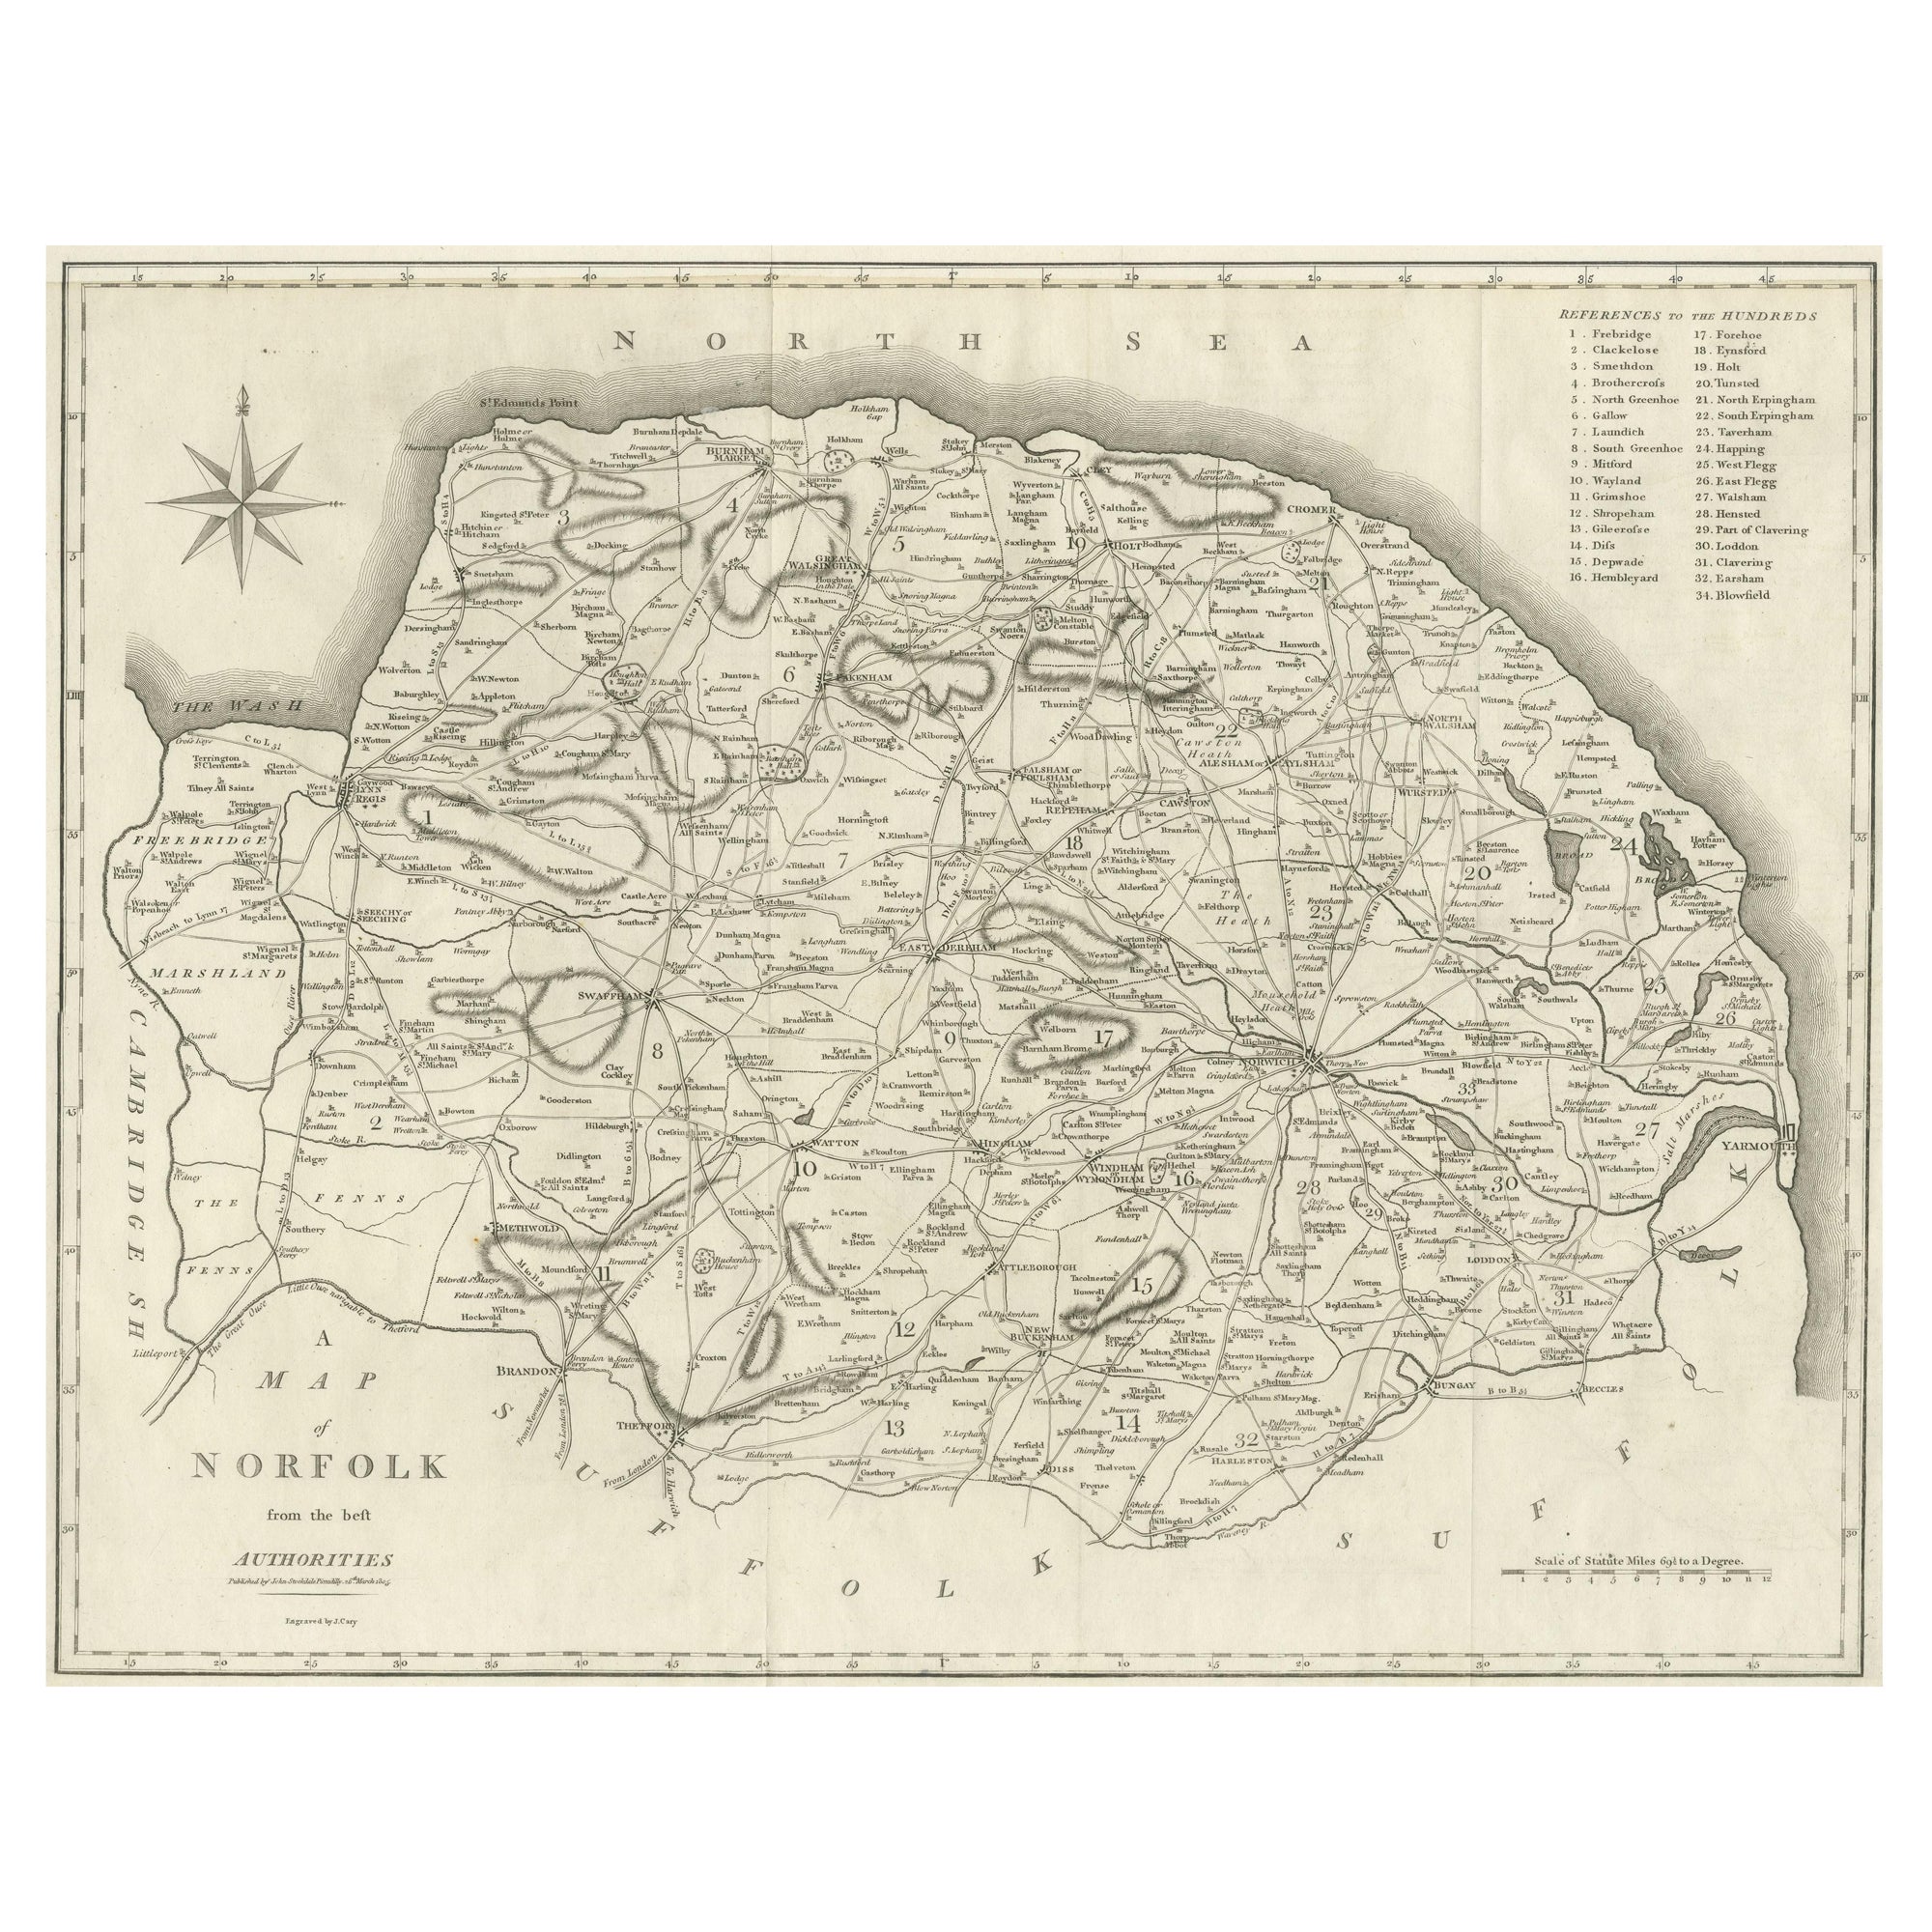 Large Antique County Map of Norfolk, England